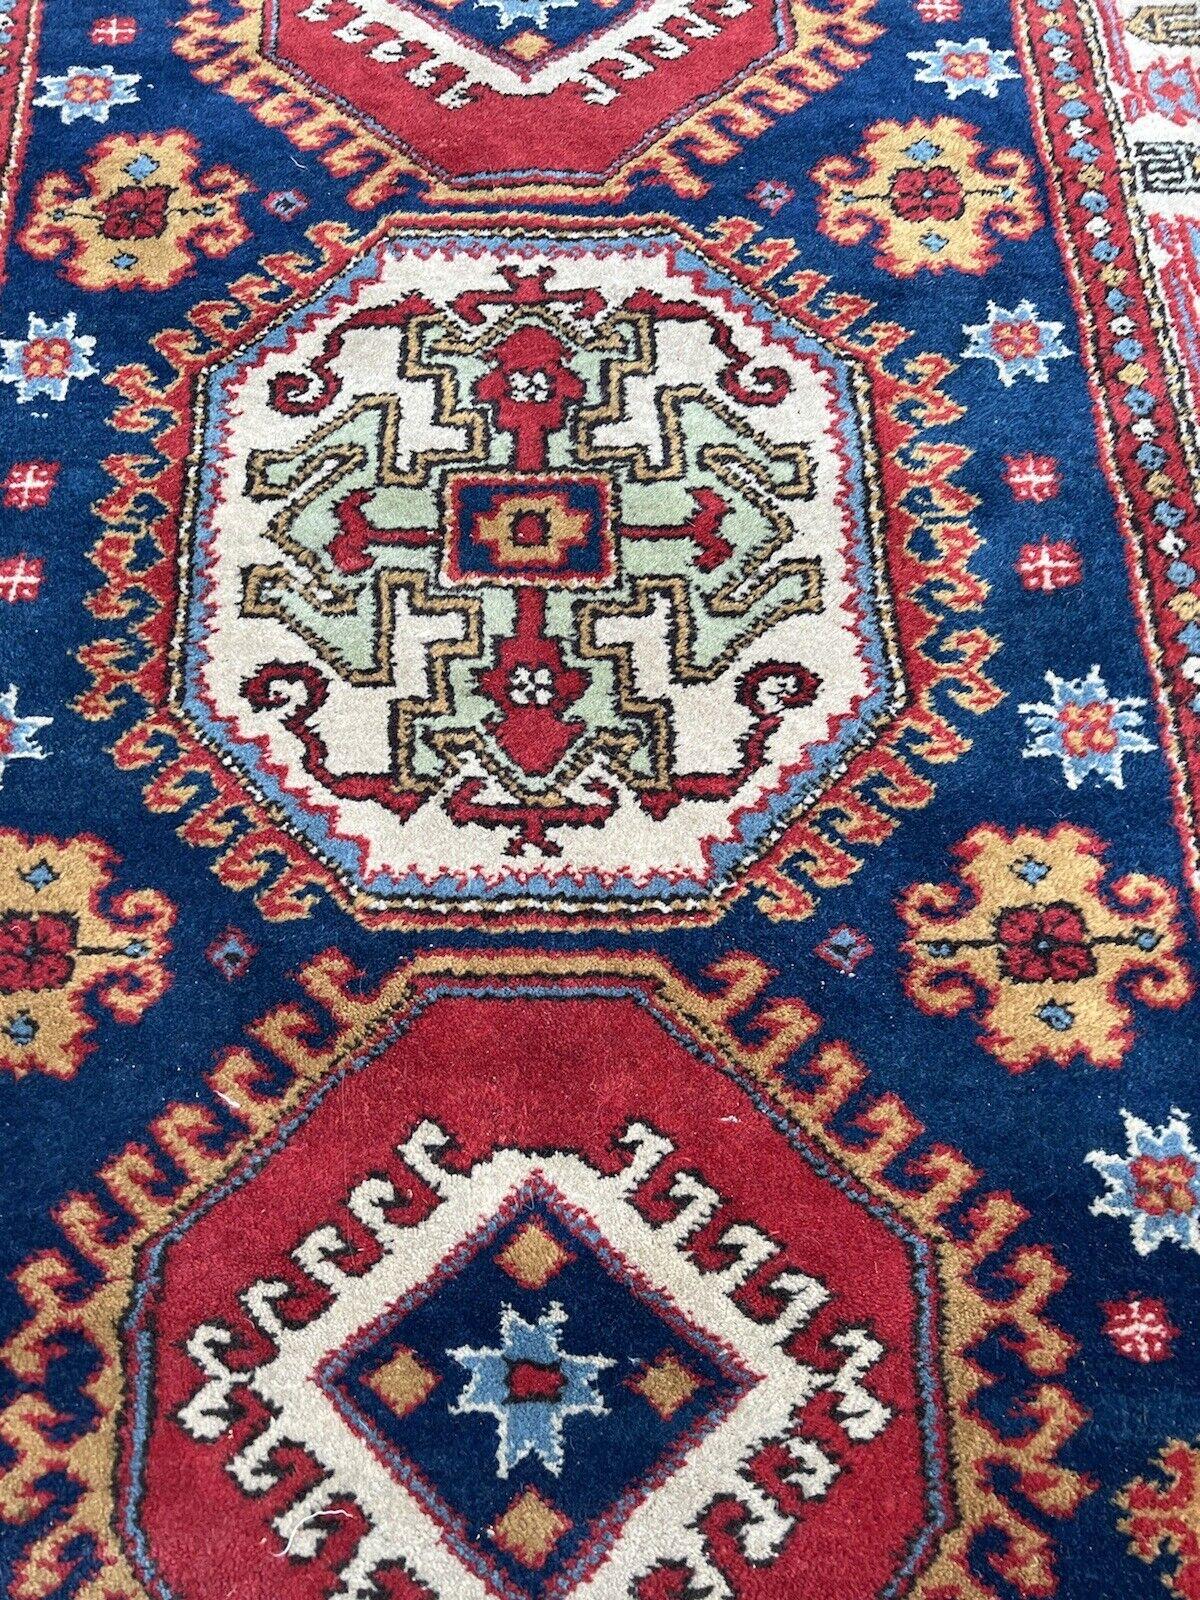 Handmade Vintage Caucasian Erevan Rug 2.6' x 4.1', 1970s - 1S66 In Good Condition For Sale In Bordeaux, FR